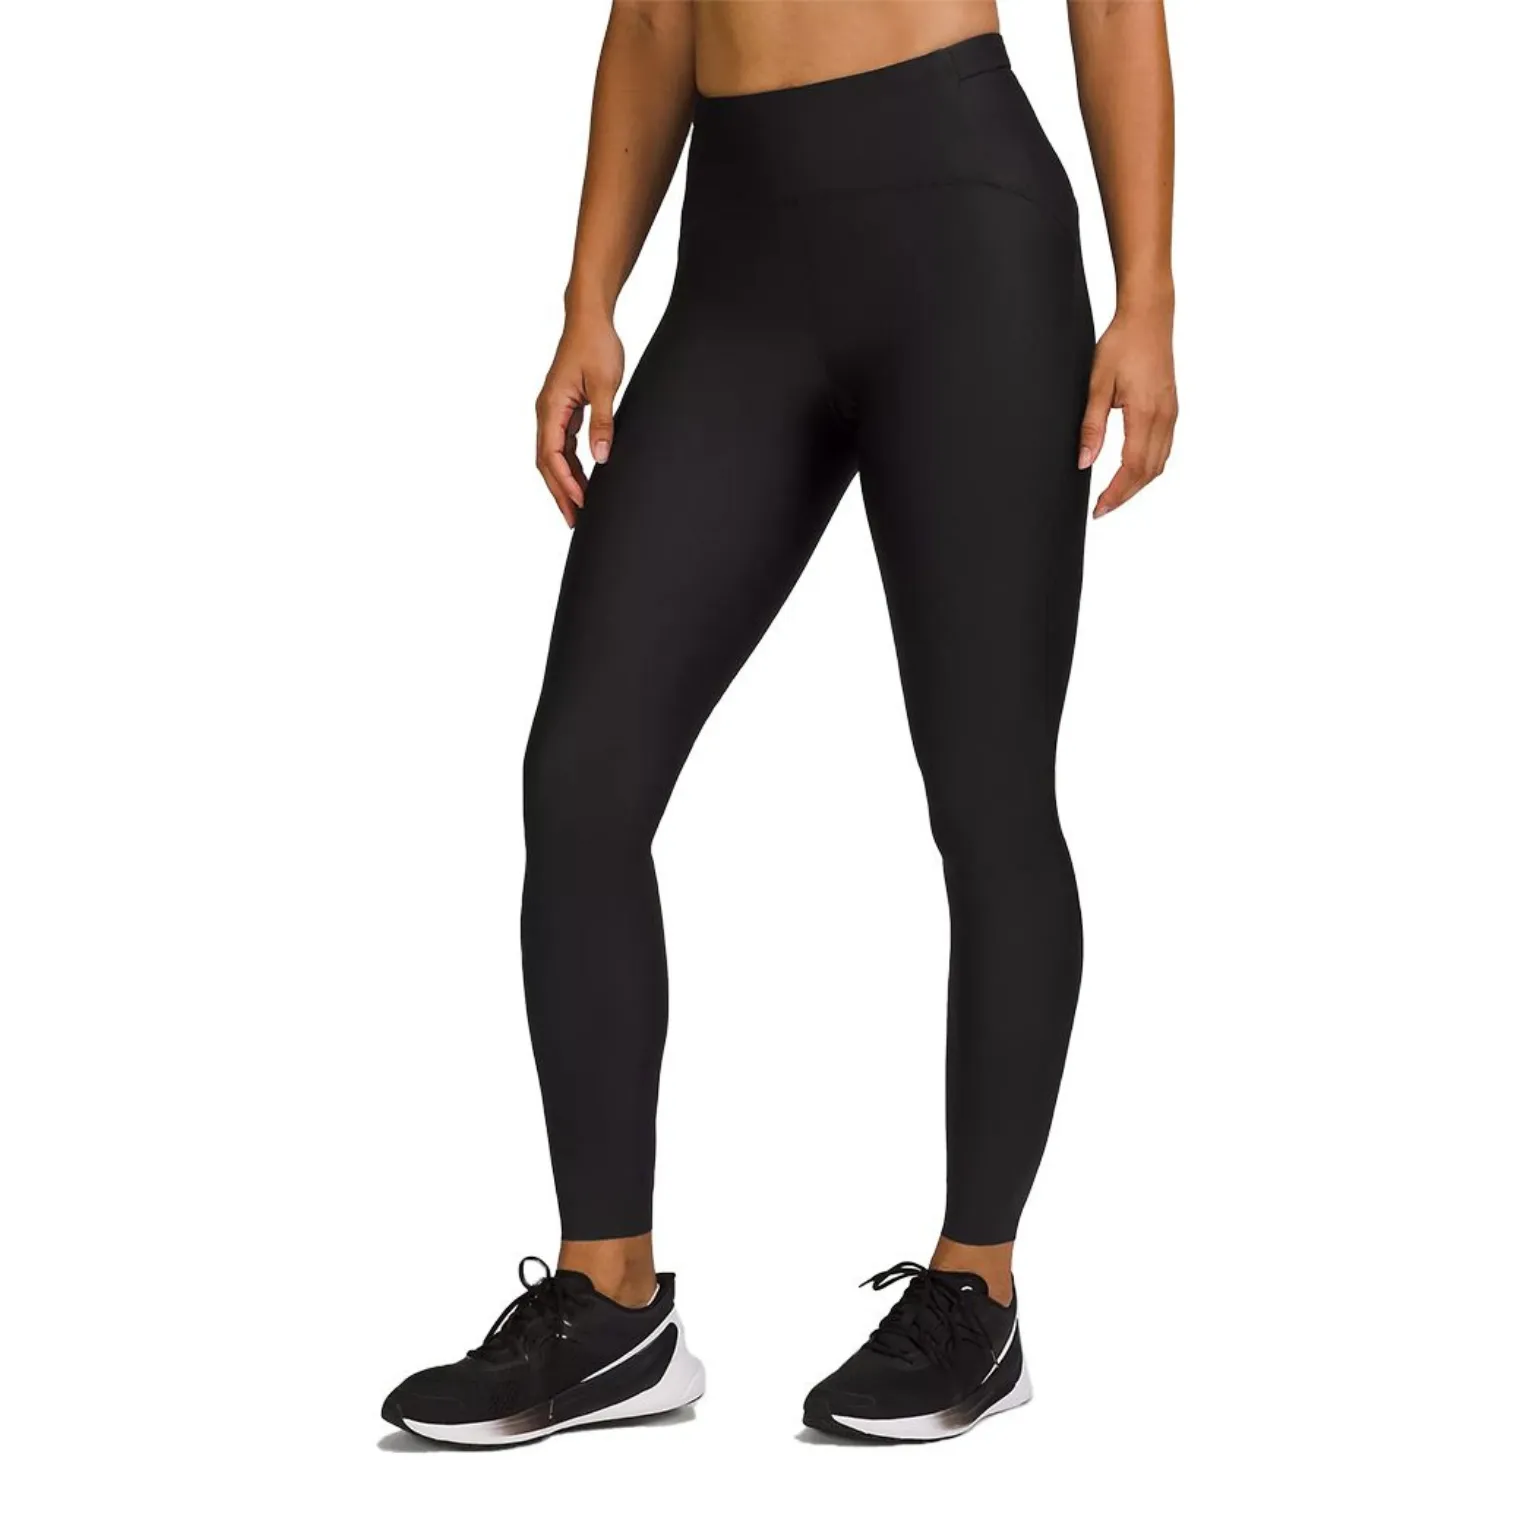 Compression Leggings manufacturing with superior quality